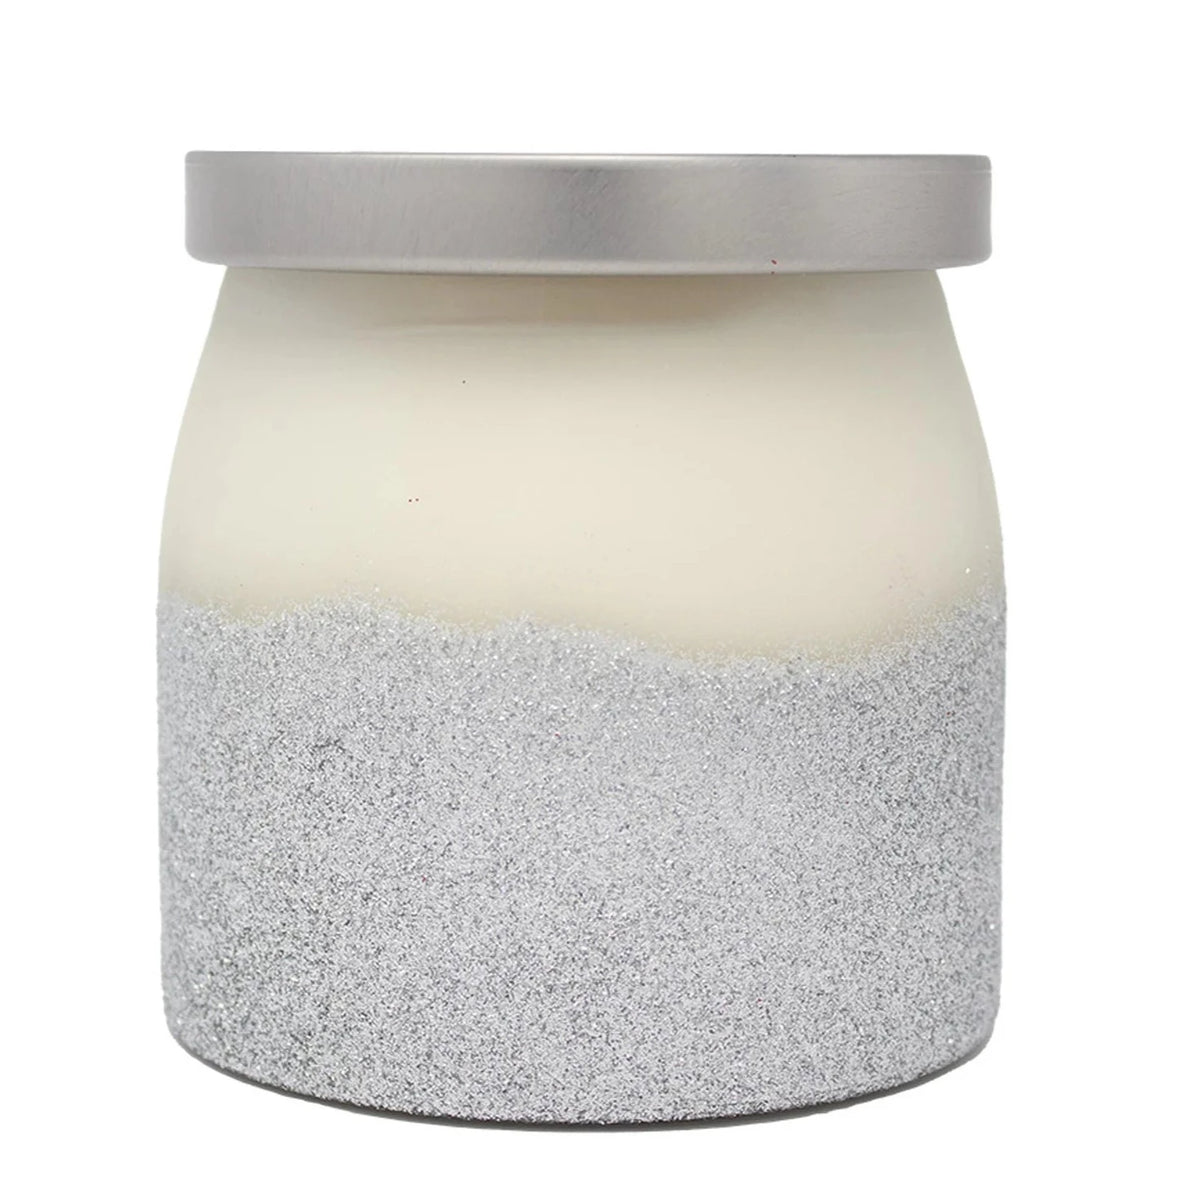 White Cocoa Pine 16oz Limited Edition Candle by Milkhouse Candle Co.